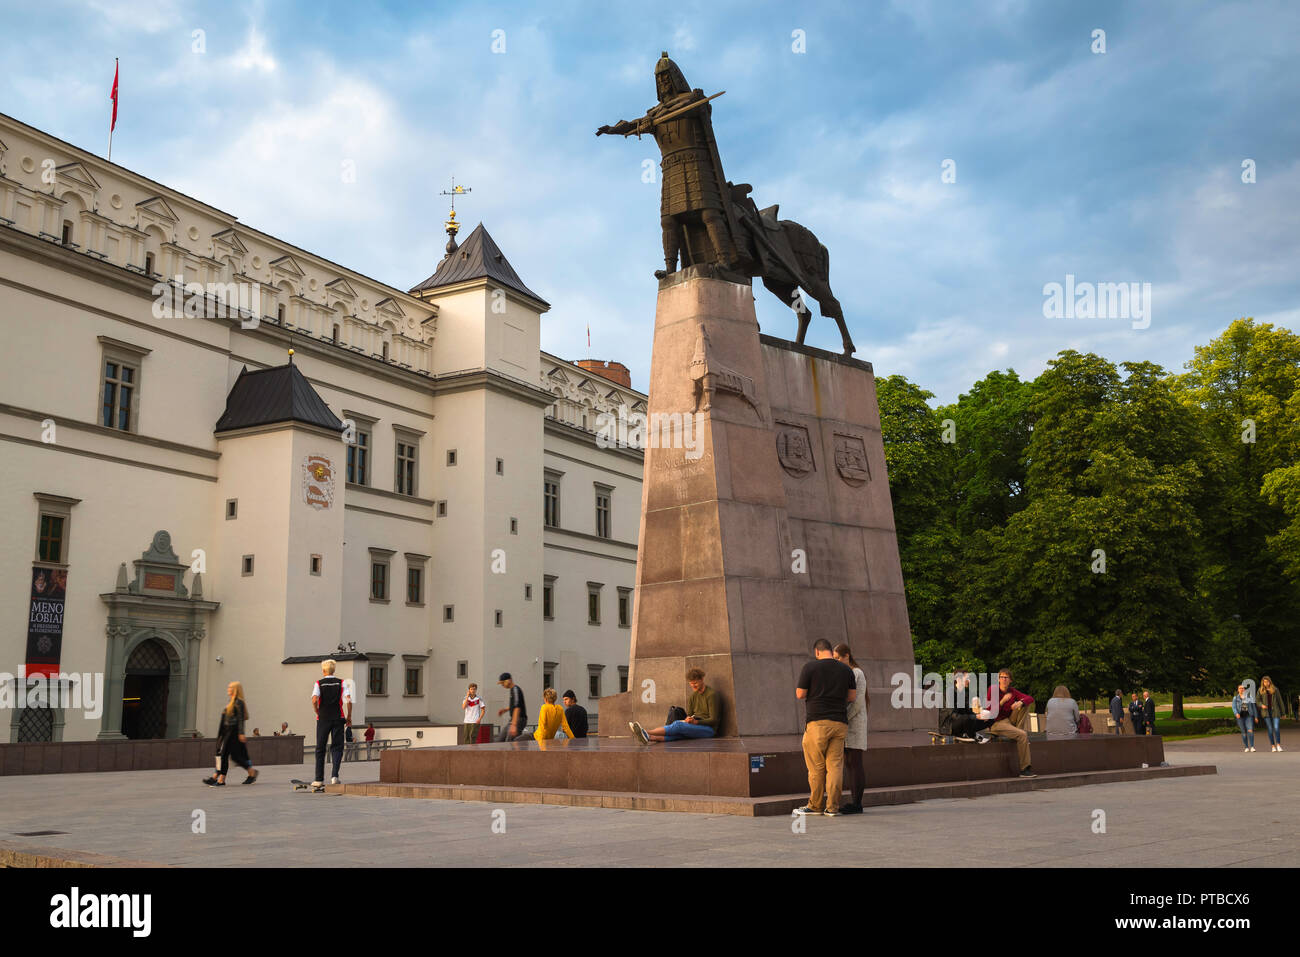 Cathedral Square Vilnius, view on a summer evening of people gathered around the Monument to Grand Duke Gediminas in Cathedral Square,Vilnius Old Town Stock Photo